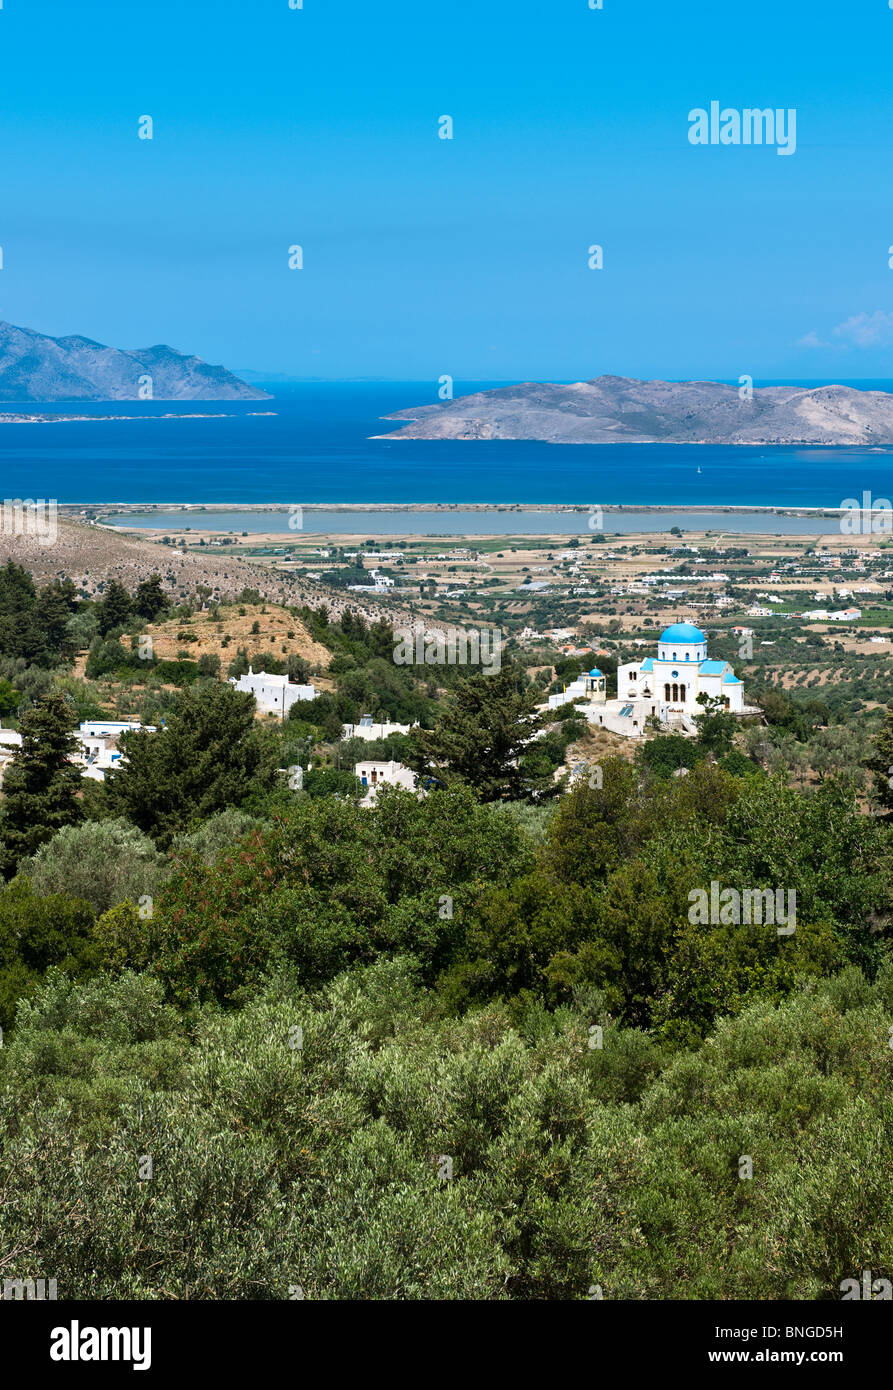 Greece, Dodecanese, Kos, view on the islad from Zia village Stock Photo